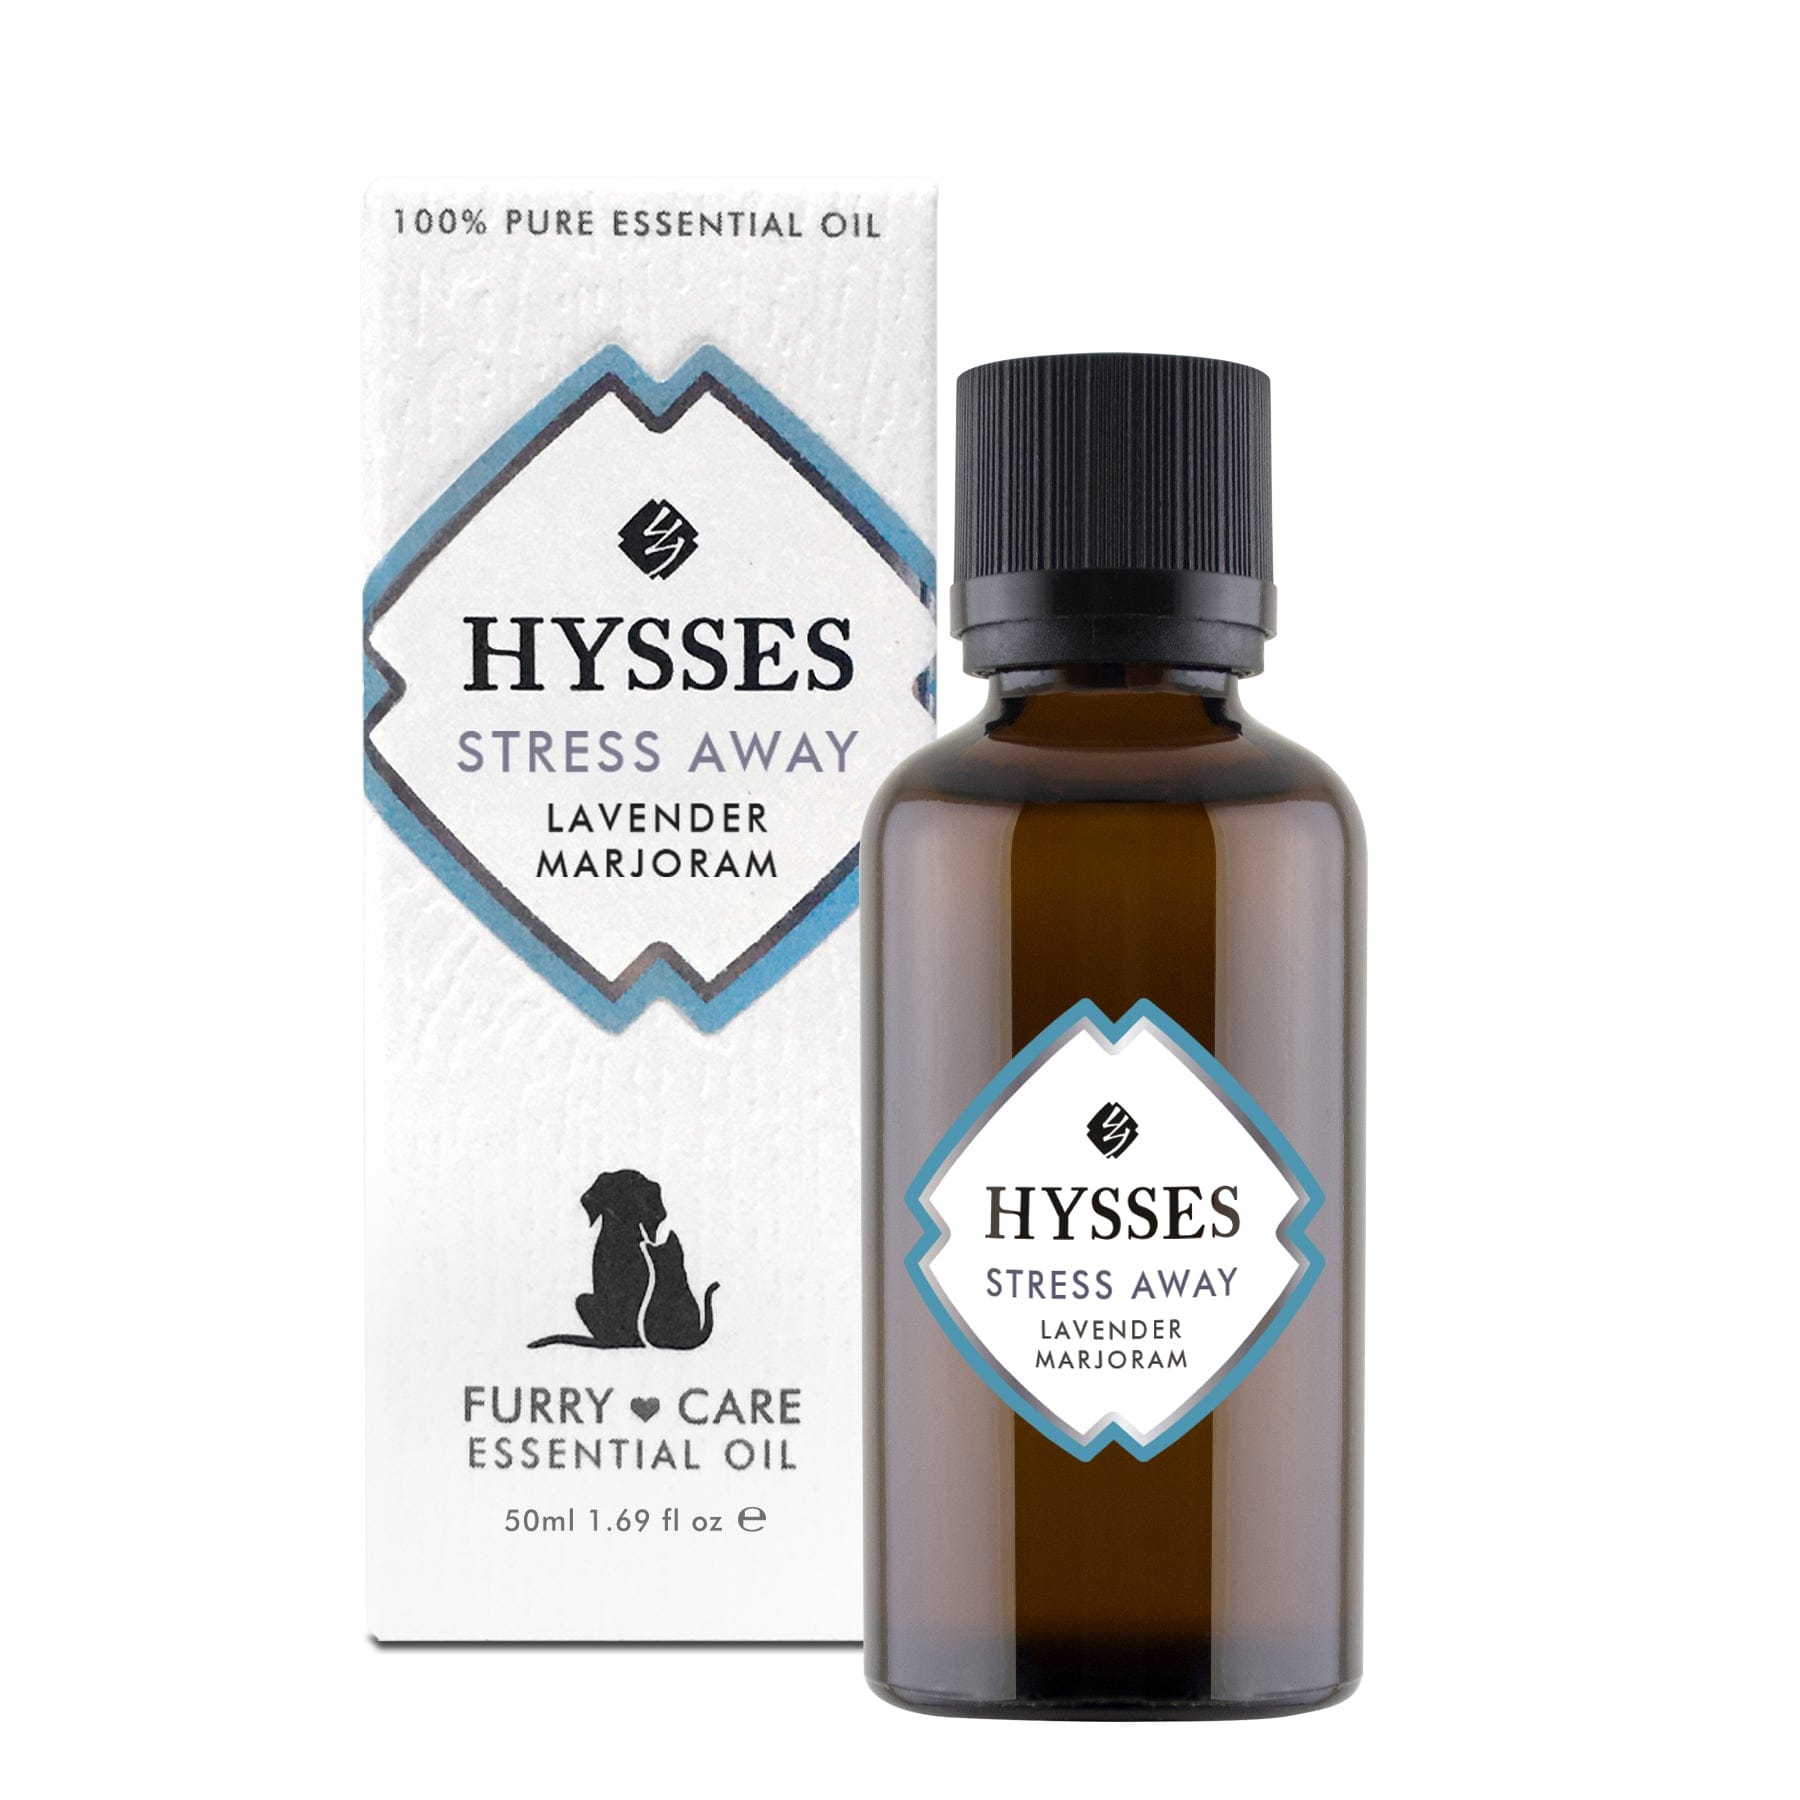 Hysses Essential Oil 50ml FurryCare, Stress Away